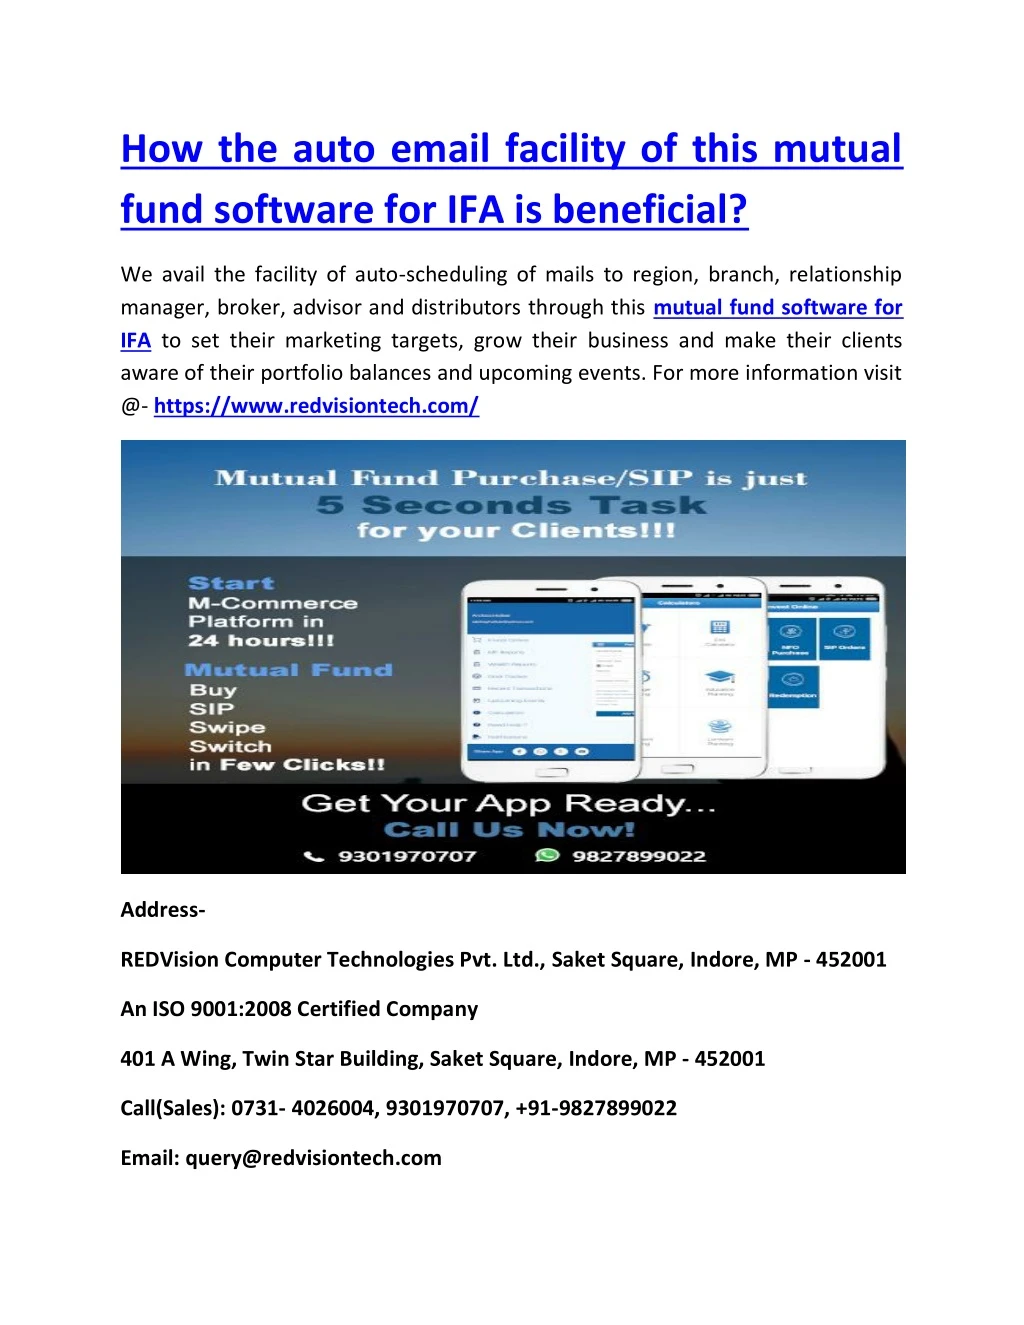 how the auto email facility of this mutual fund